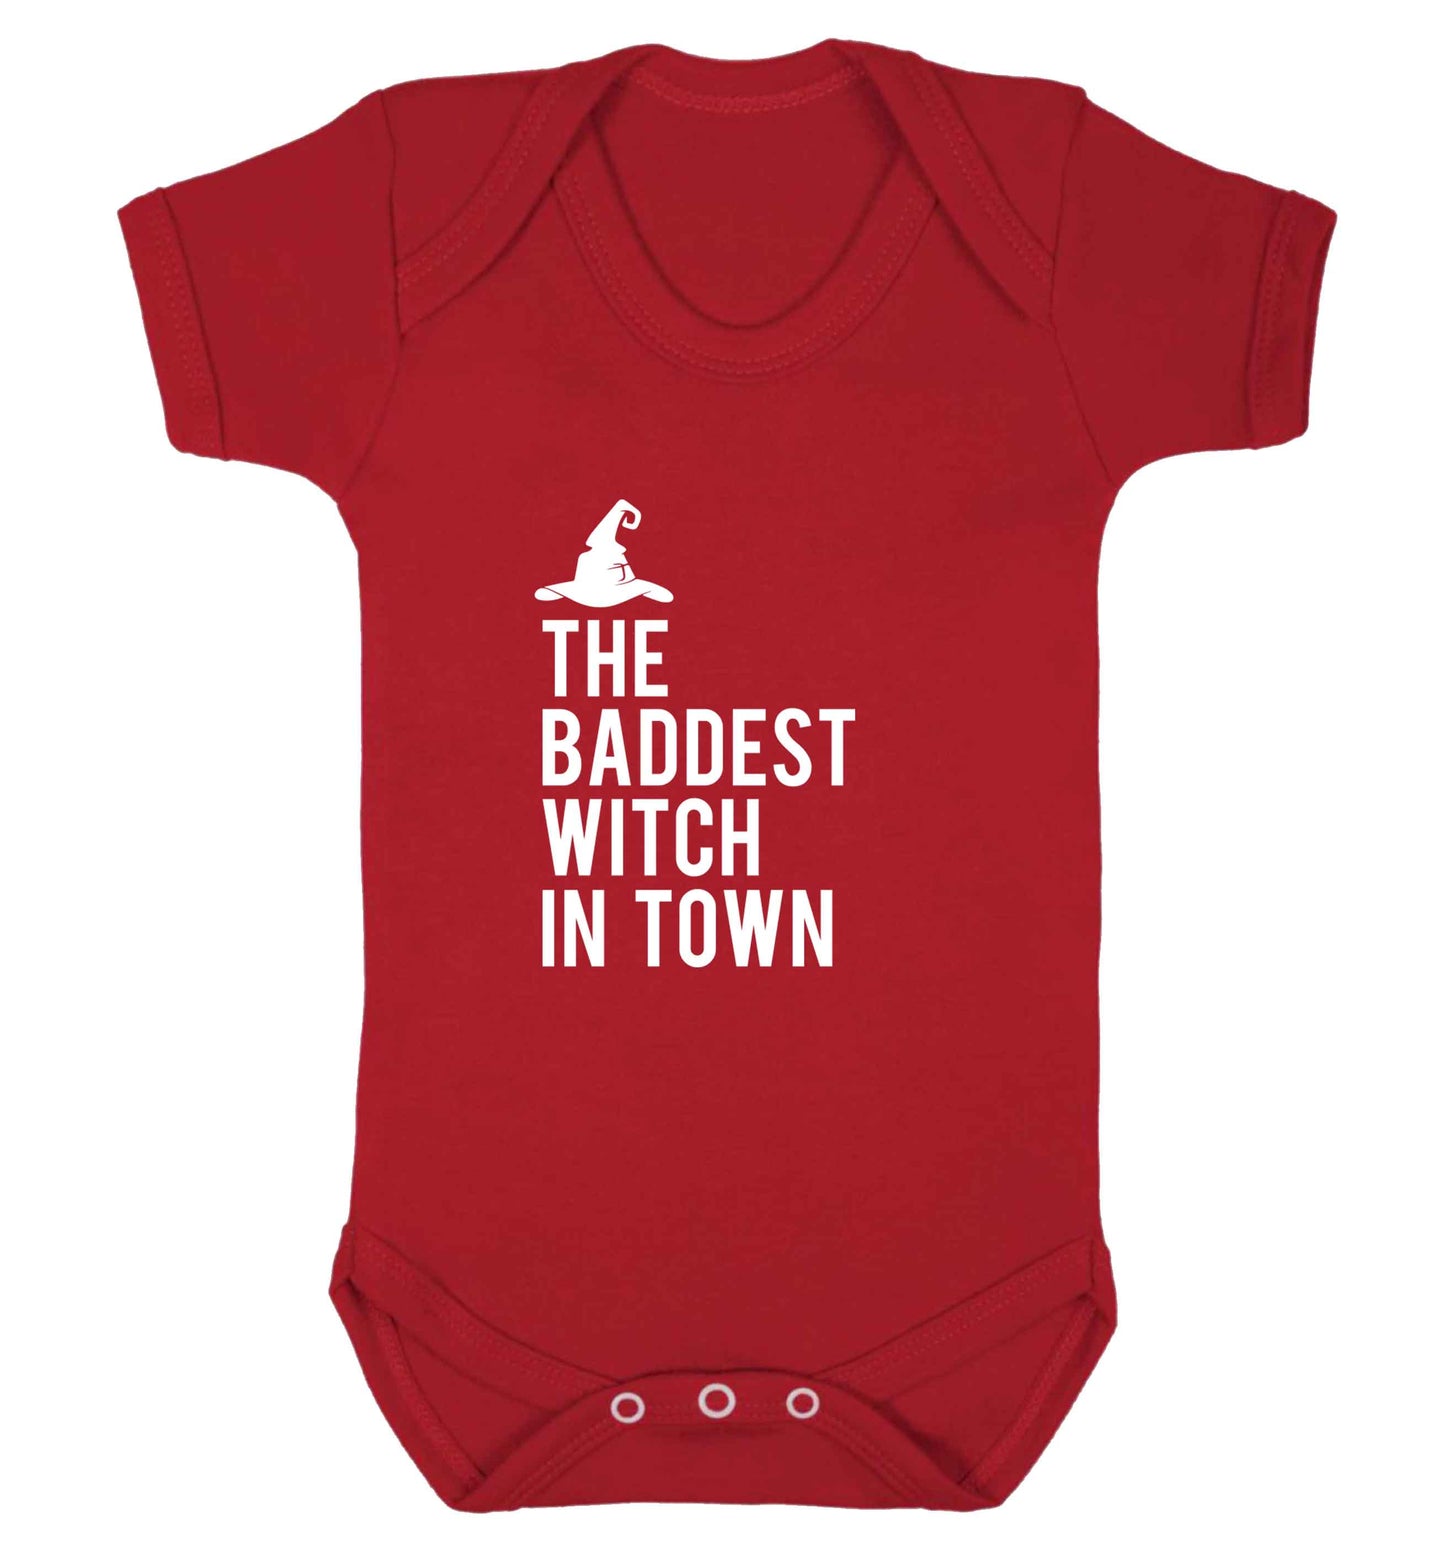 Badest witch in town baby vest red 18-24 months